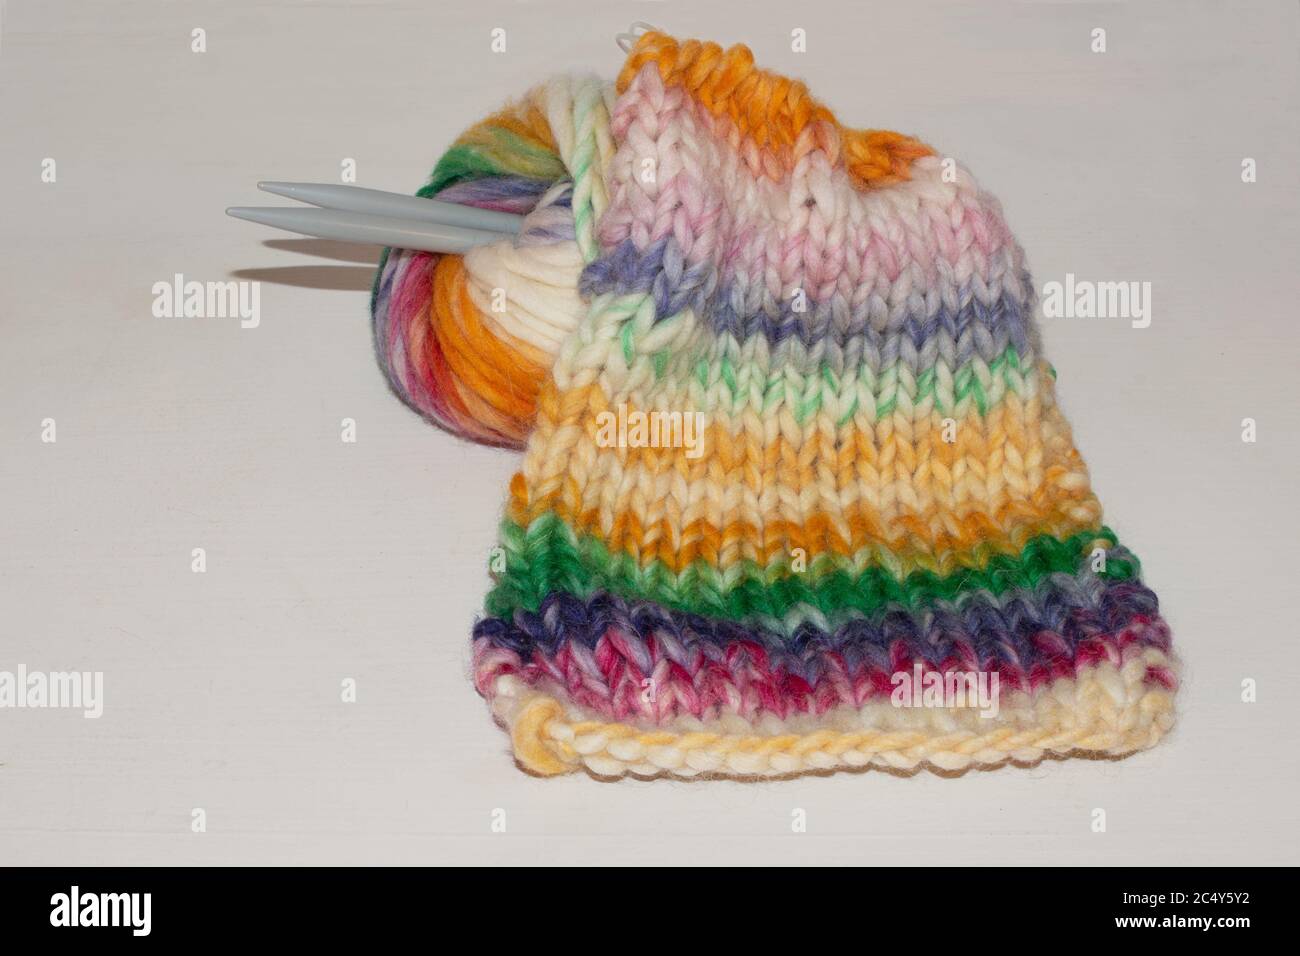 Ball Of Wool With Knitting Needles Scarf Knitted In Stockinette Stitch With Color Gradient Wool Yarn Stock Photo Alamy,Ball Python Cute